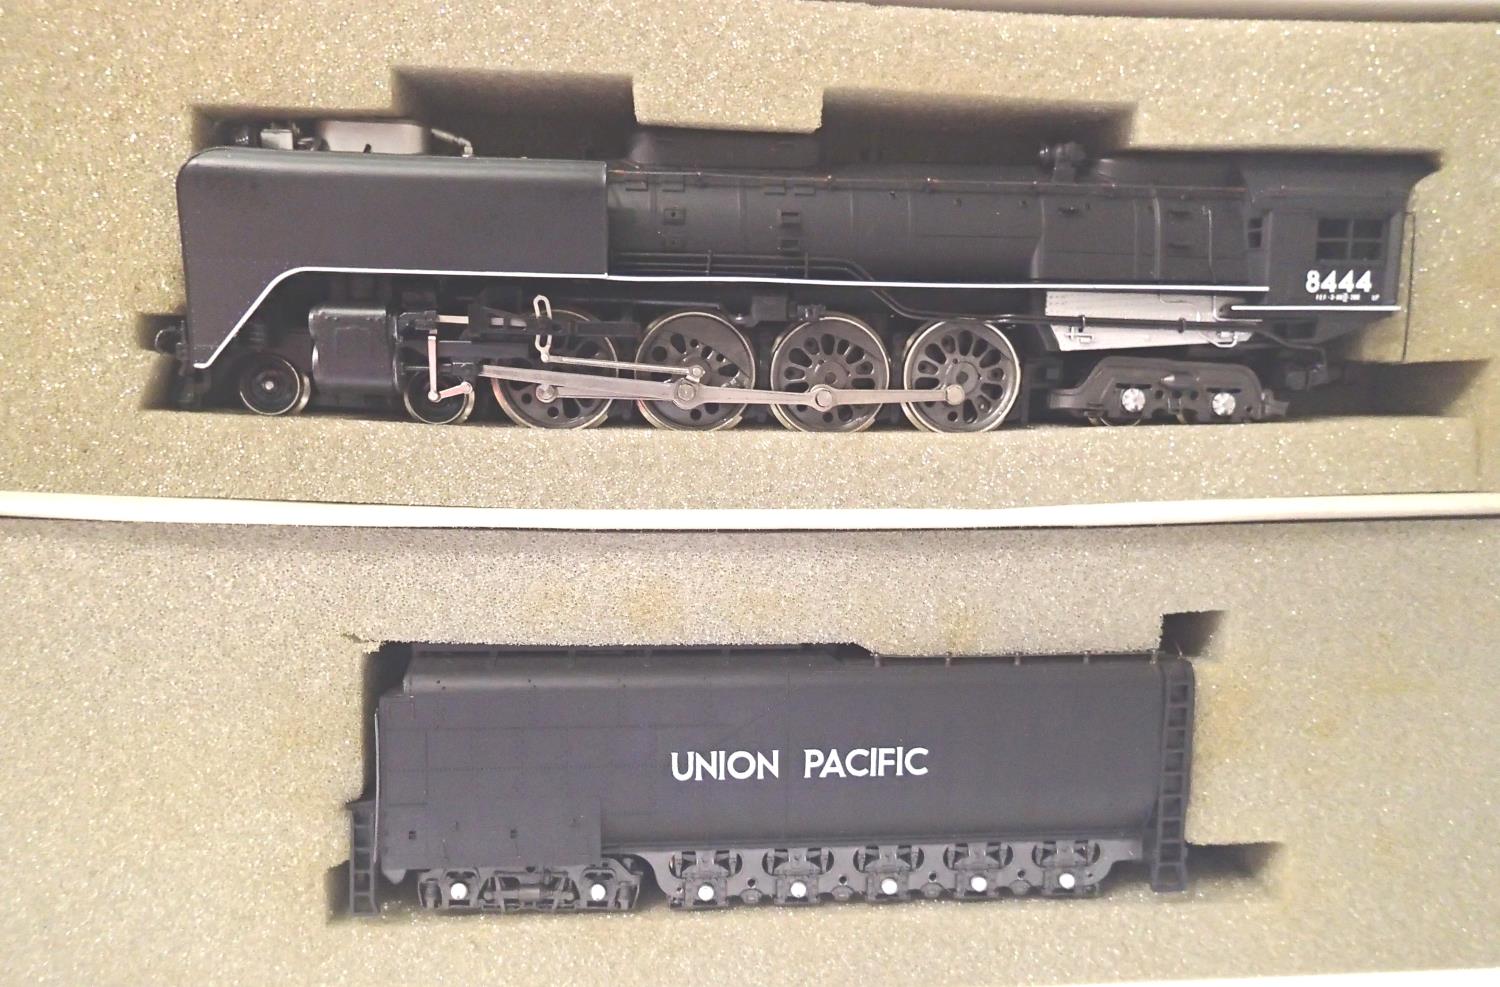 Rivarossi: 4.8.4 black 8444, Union Pacific. Very goo to excellent condition, box with wear. P&P